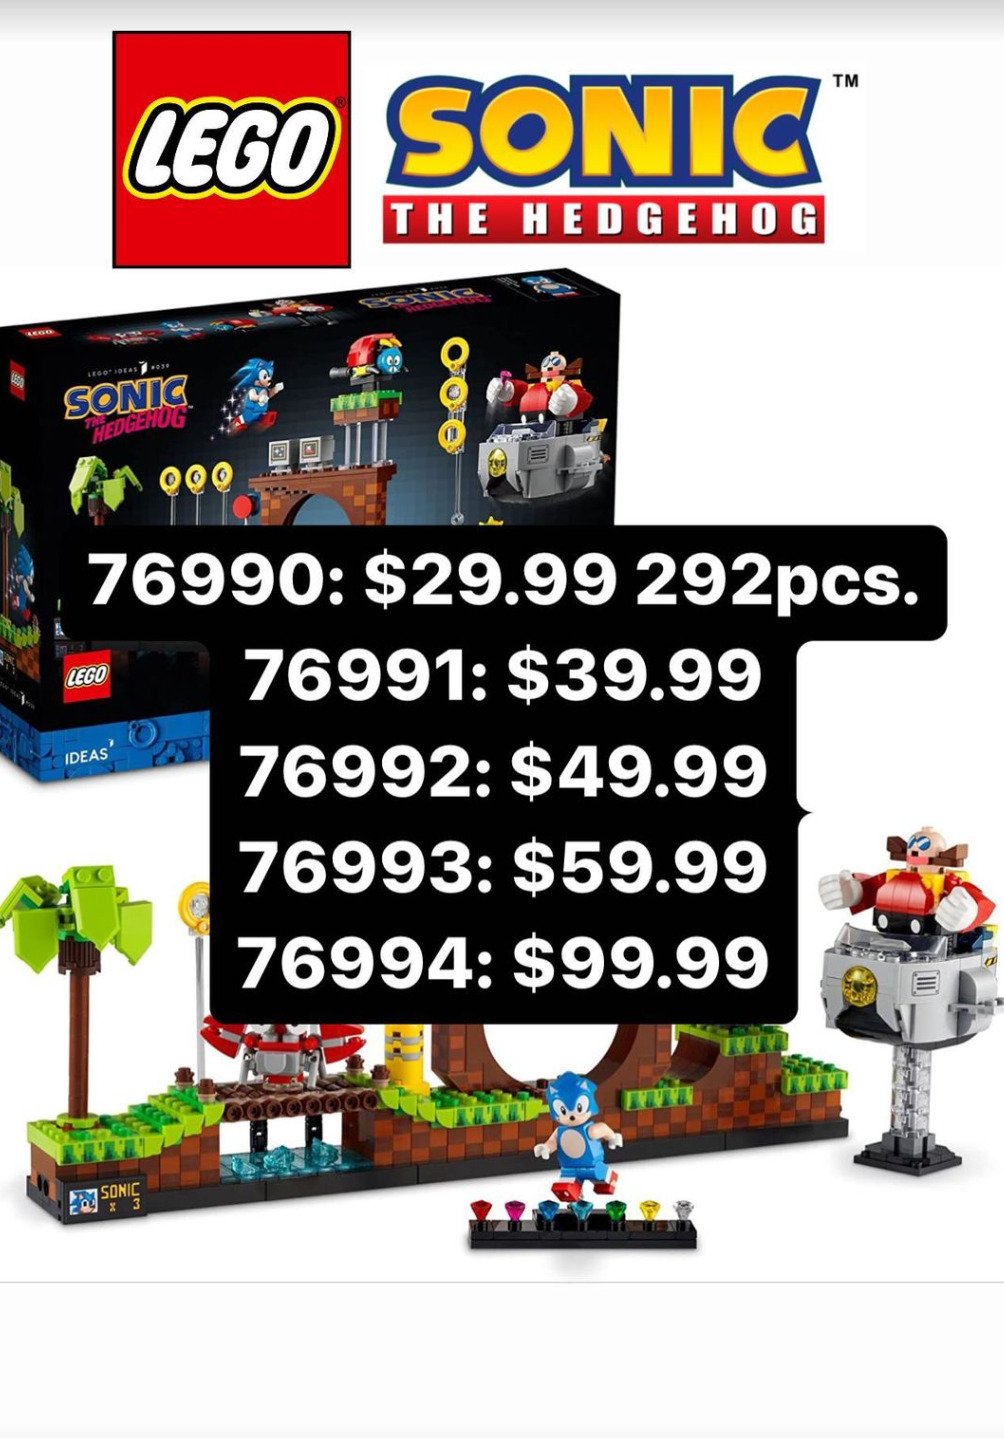 Five New Sonic The Hedgehog LEGO Sets Have Been Spotted Online